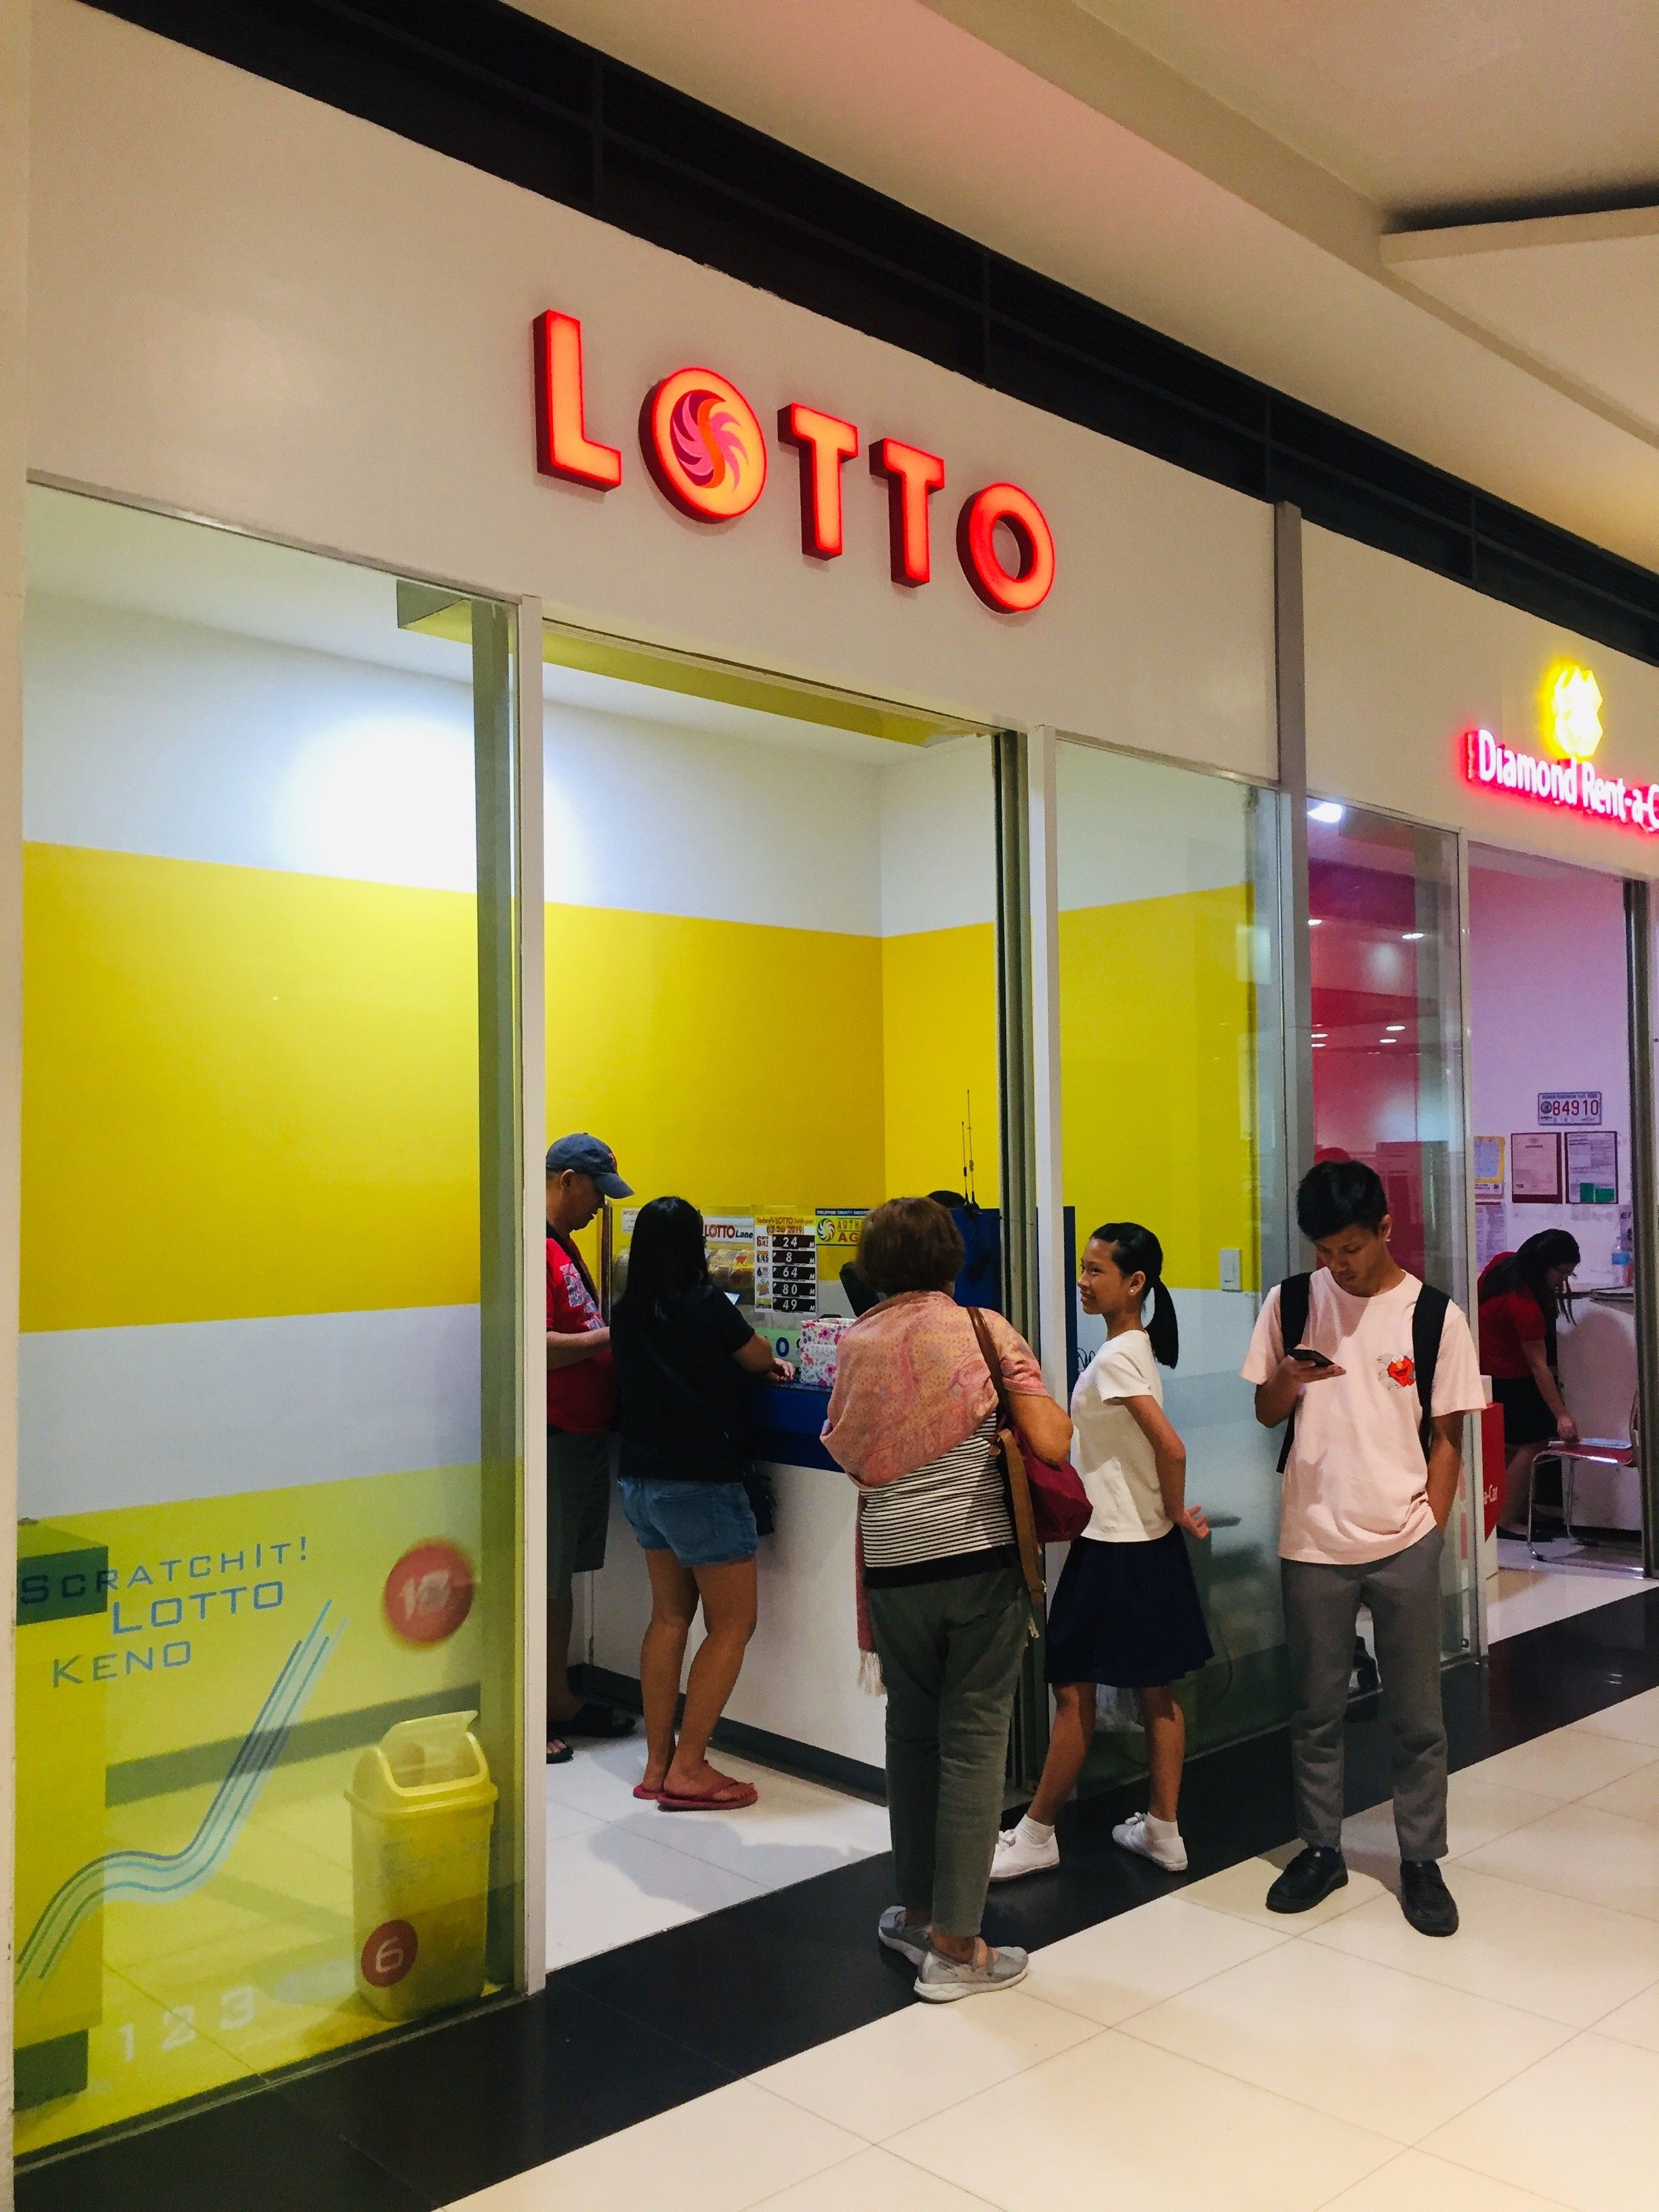 pcso lotto outlet near me